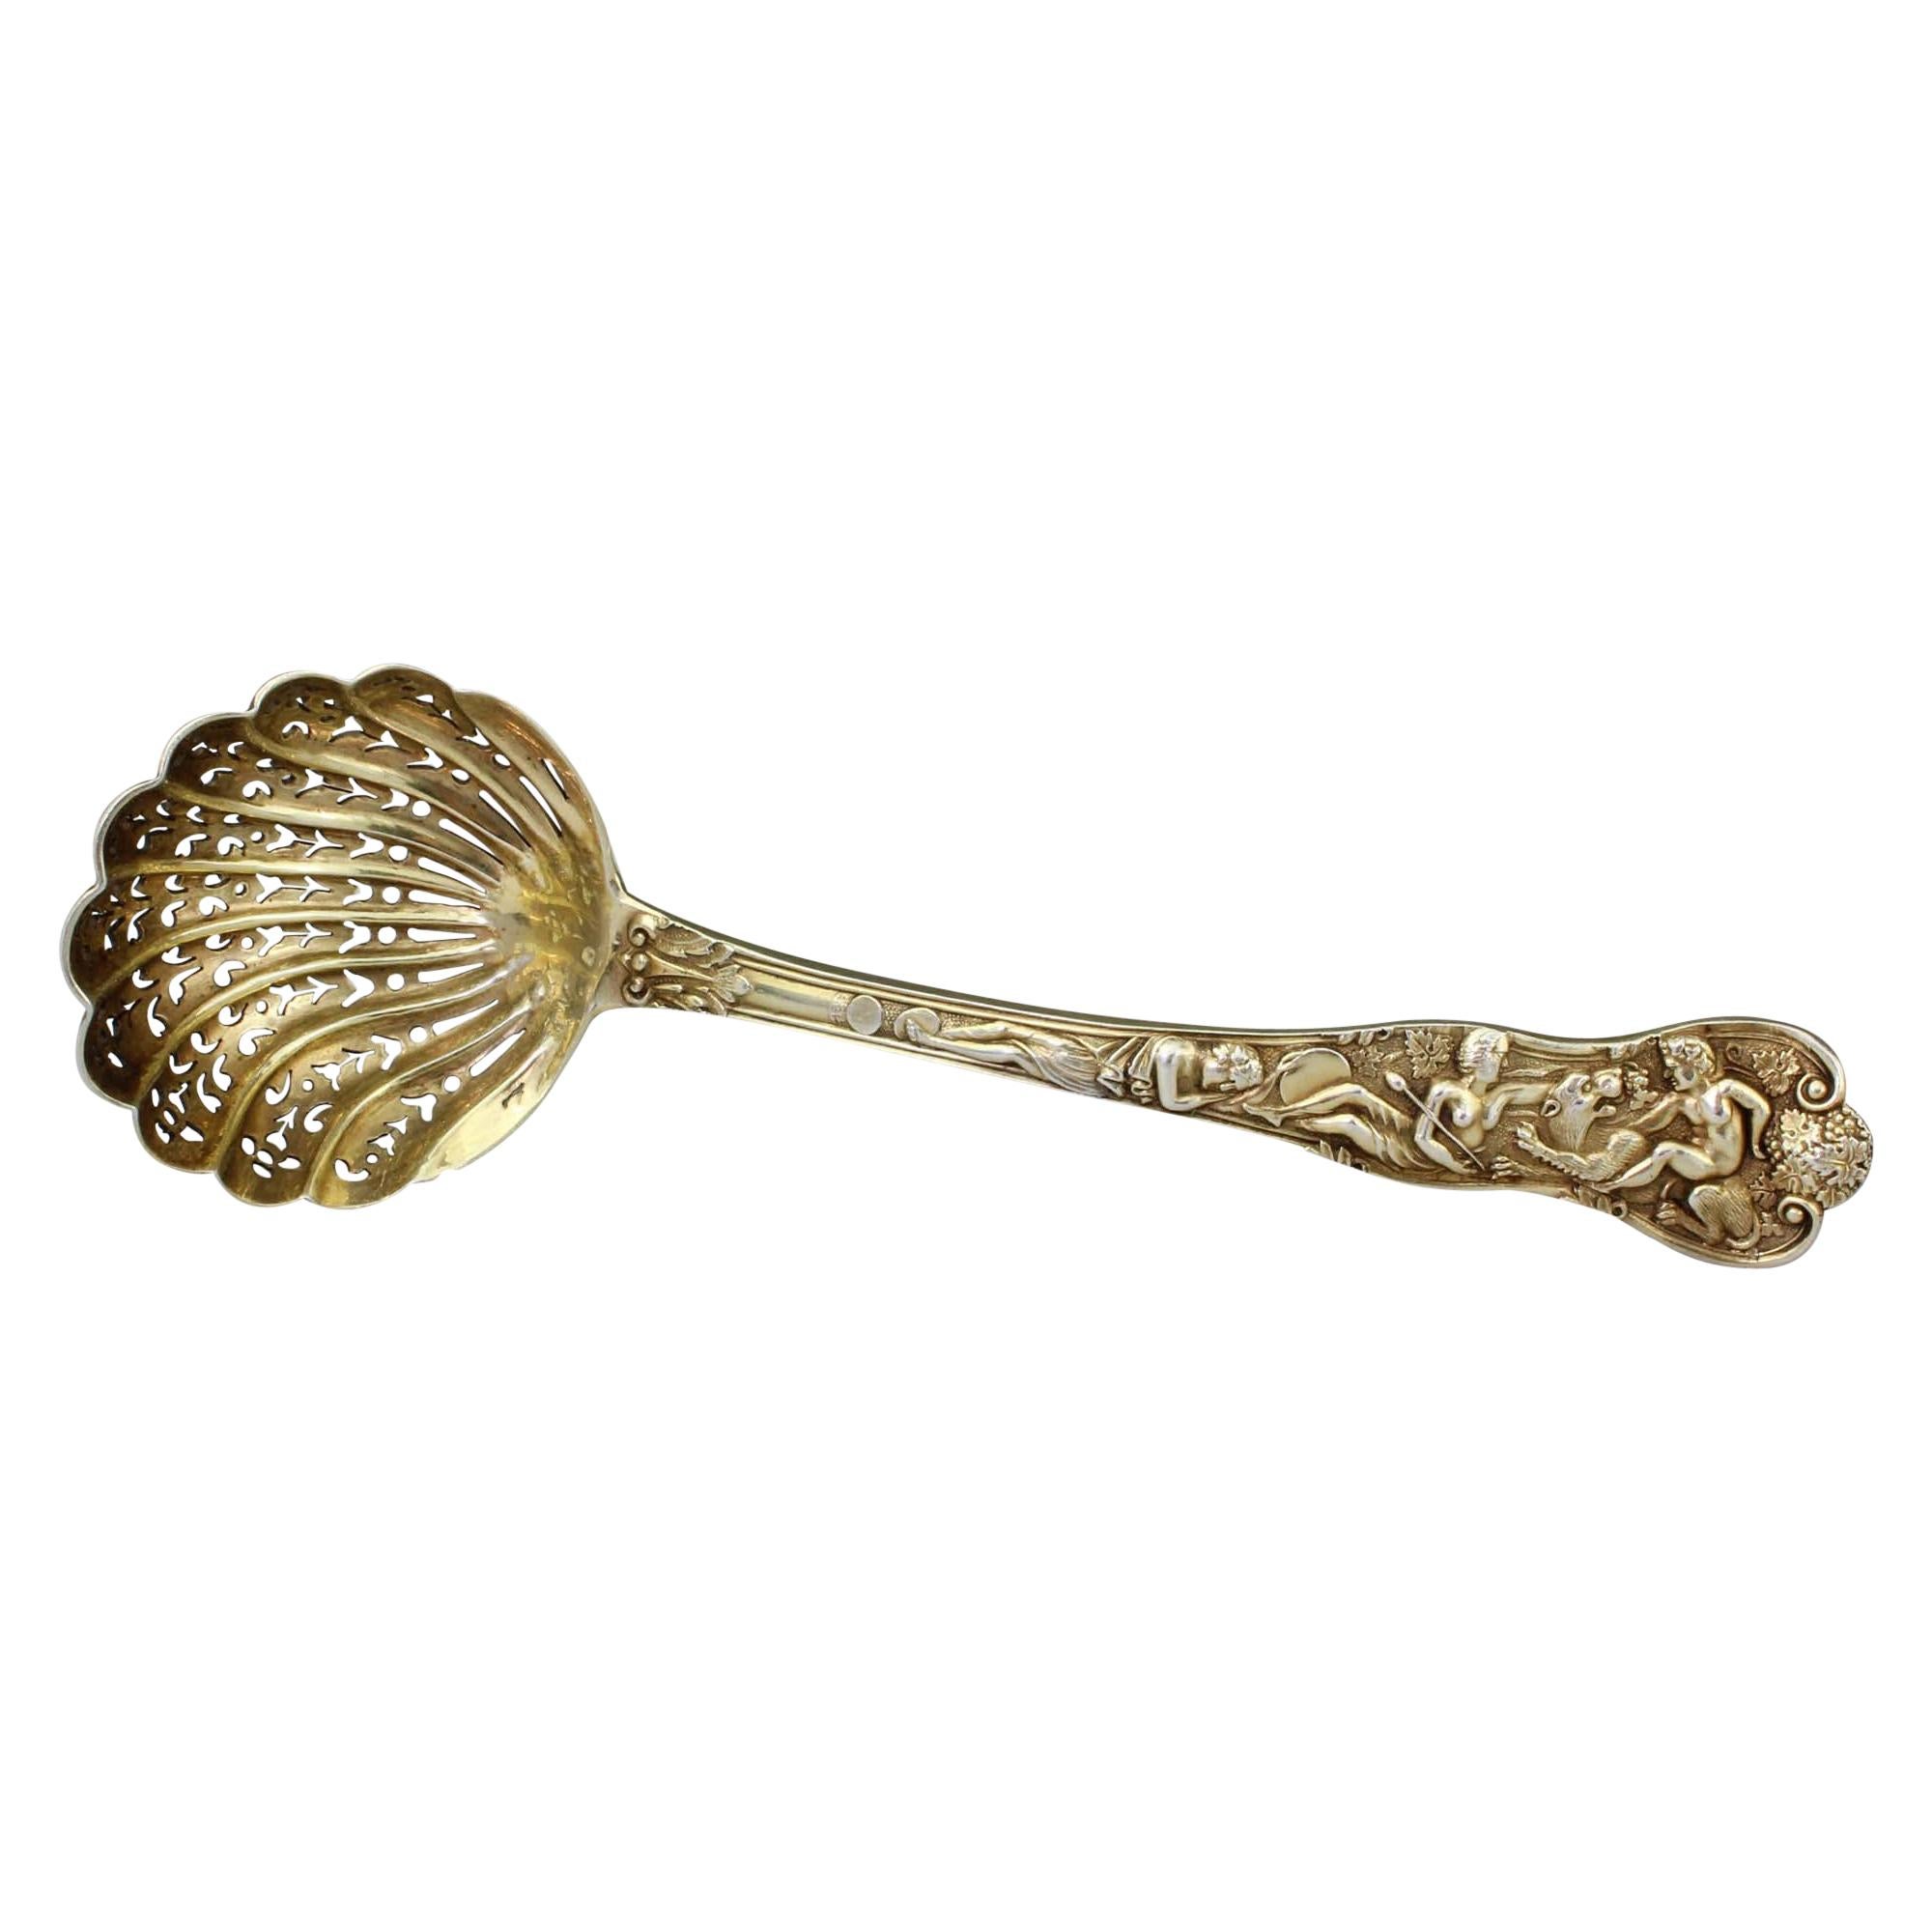 Antique Silver Gilt Sugar Sifting Spoon with Figural Decoration